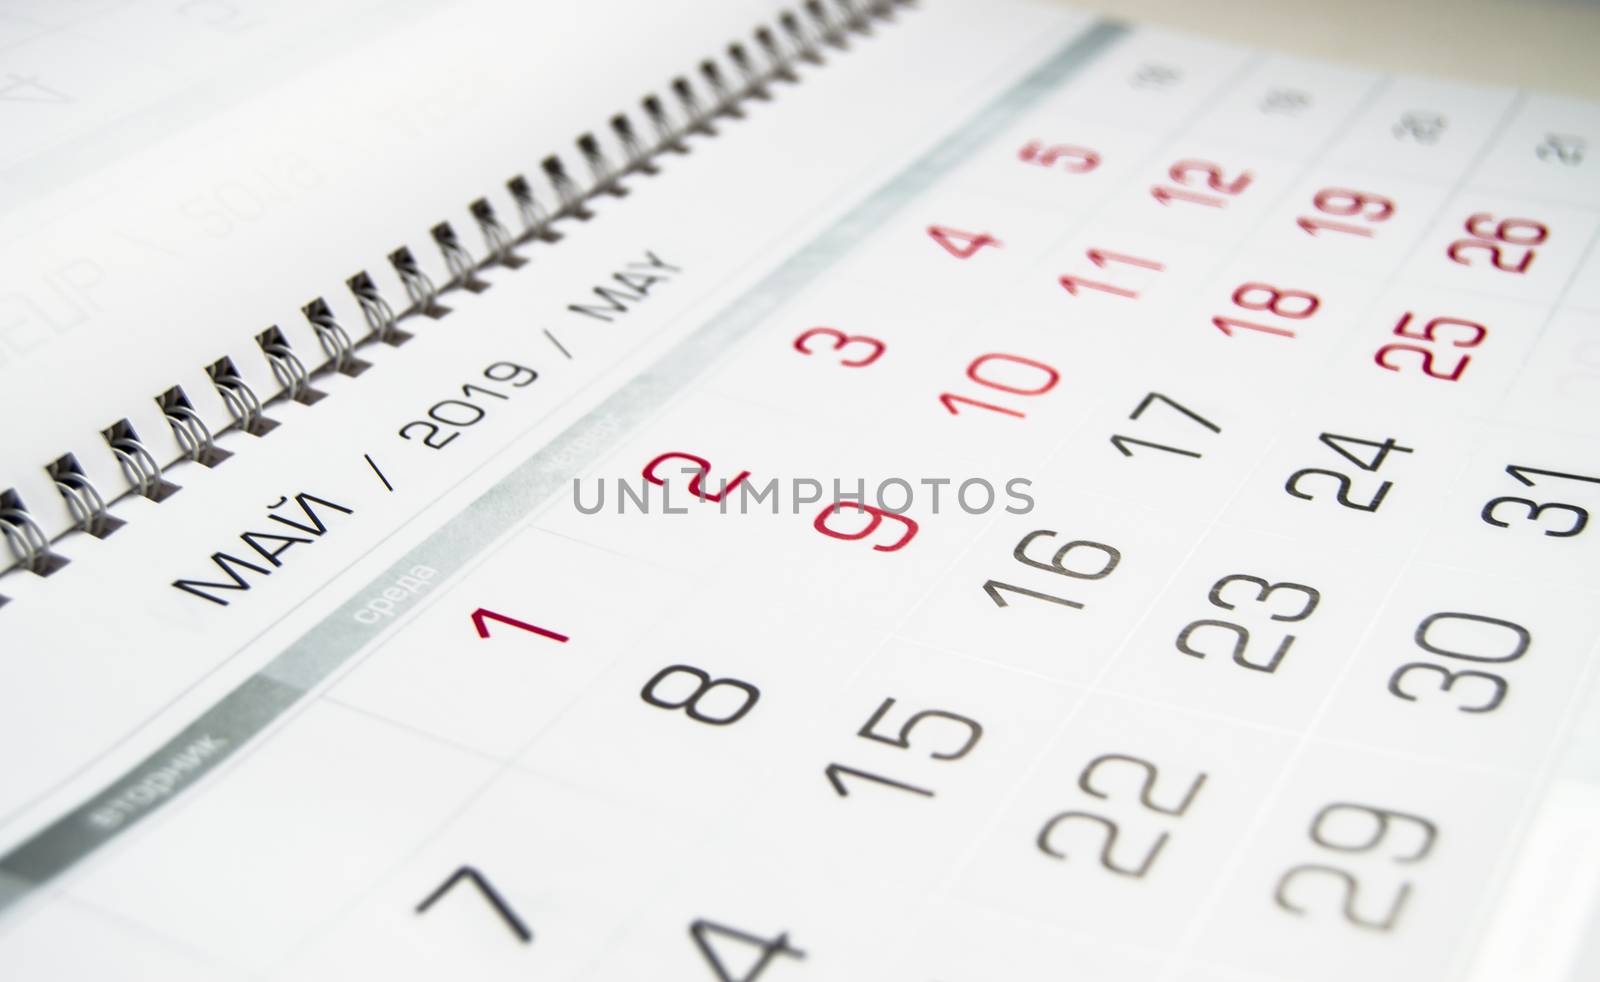 Calendar for may 2019, close-up, schedule of days with working days and holidays by claire_lucia